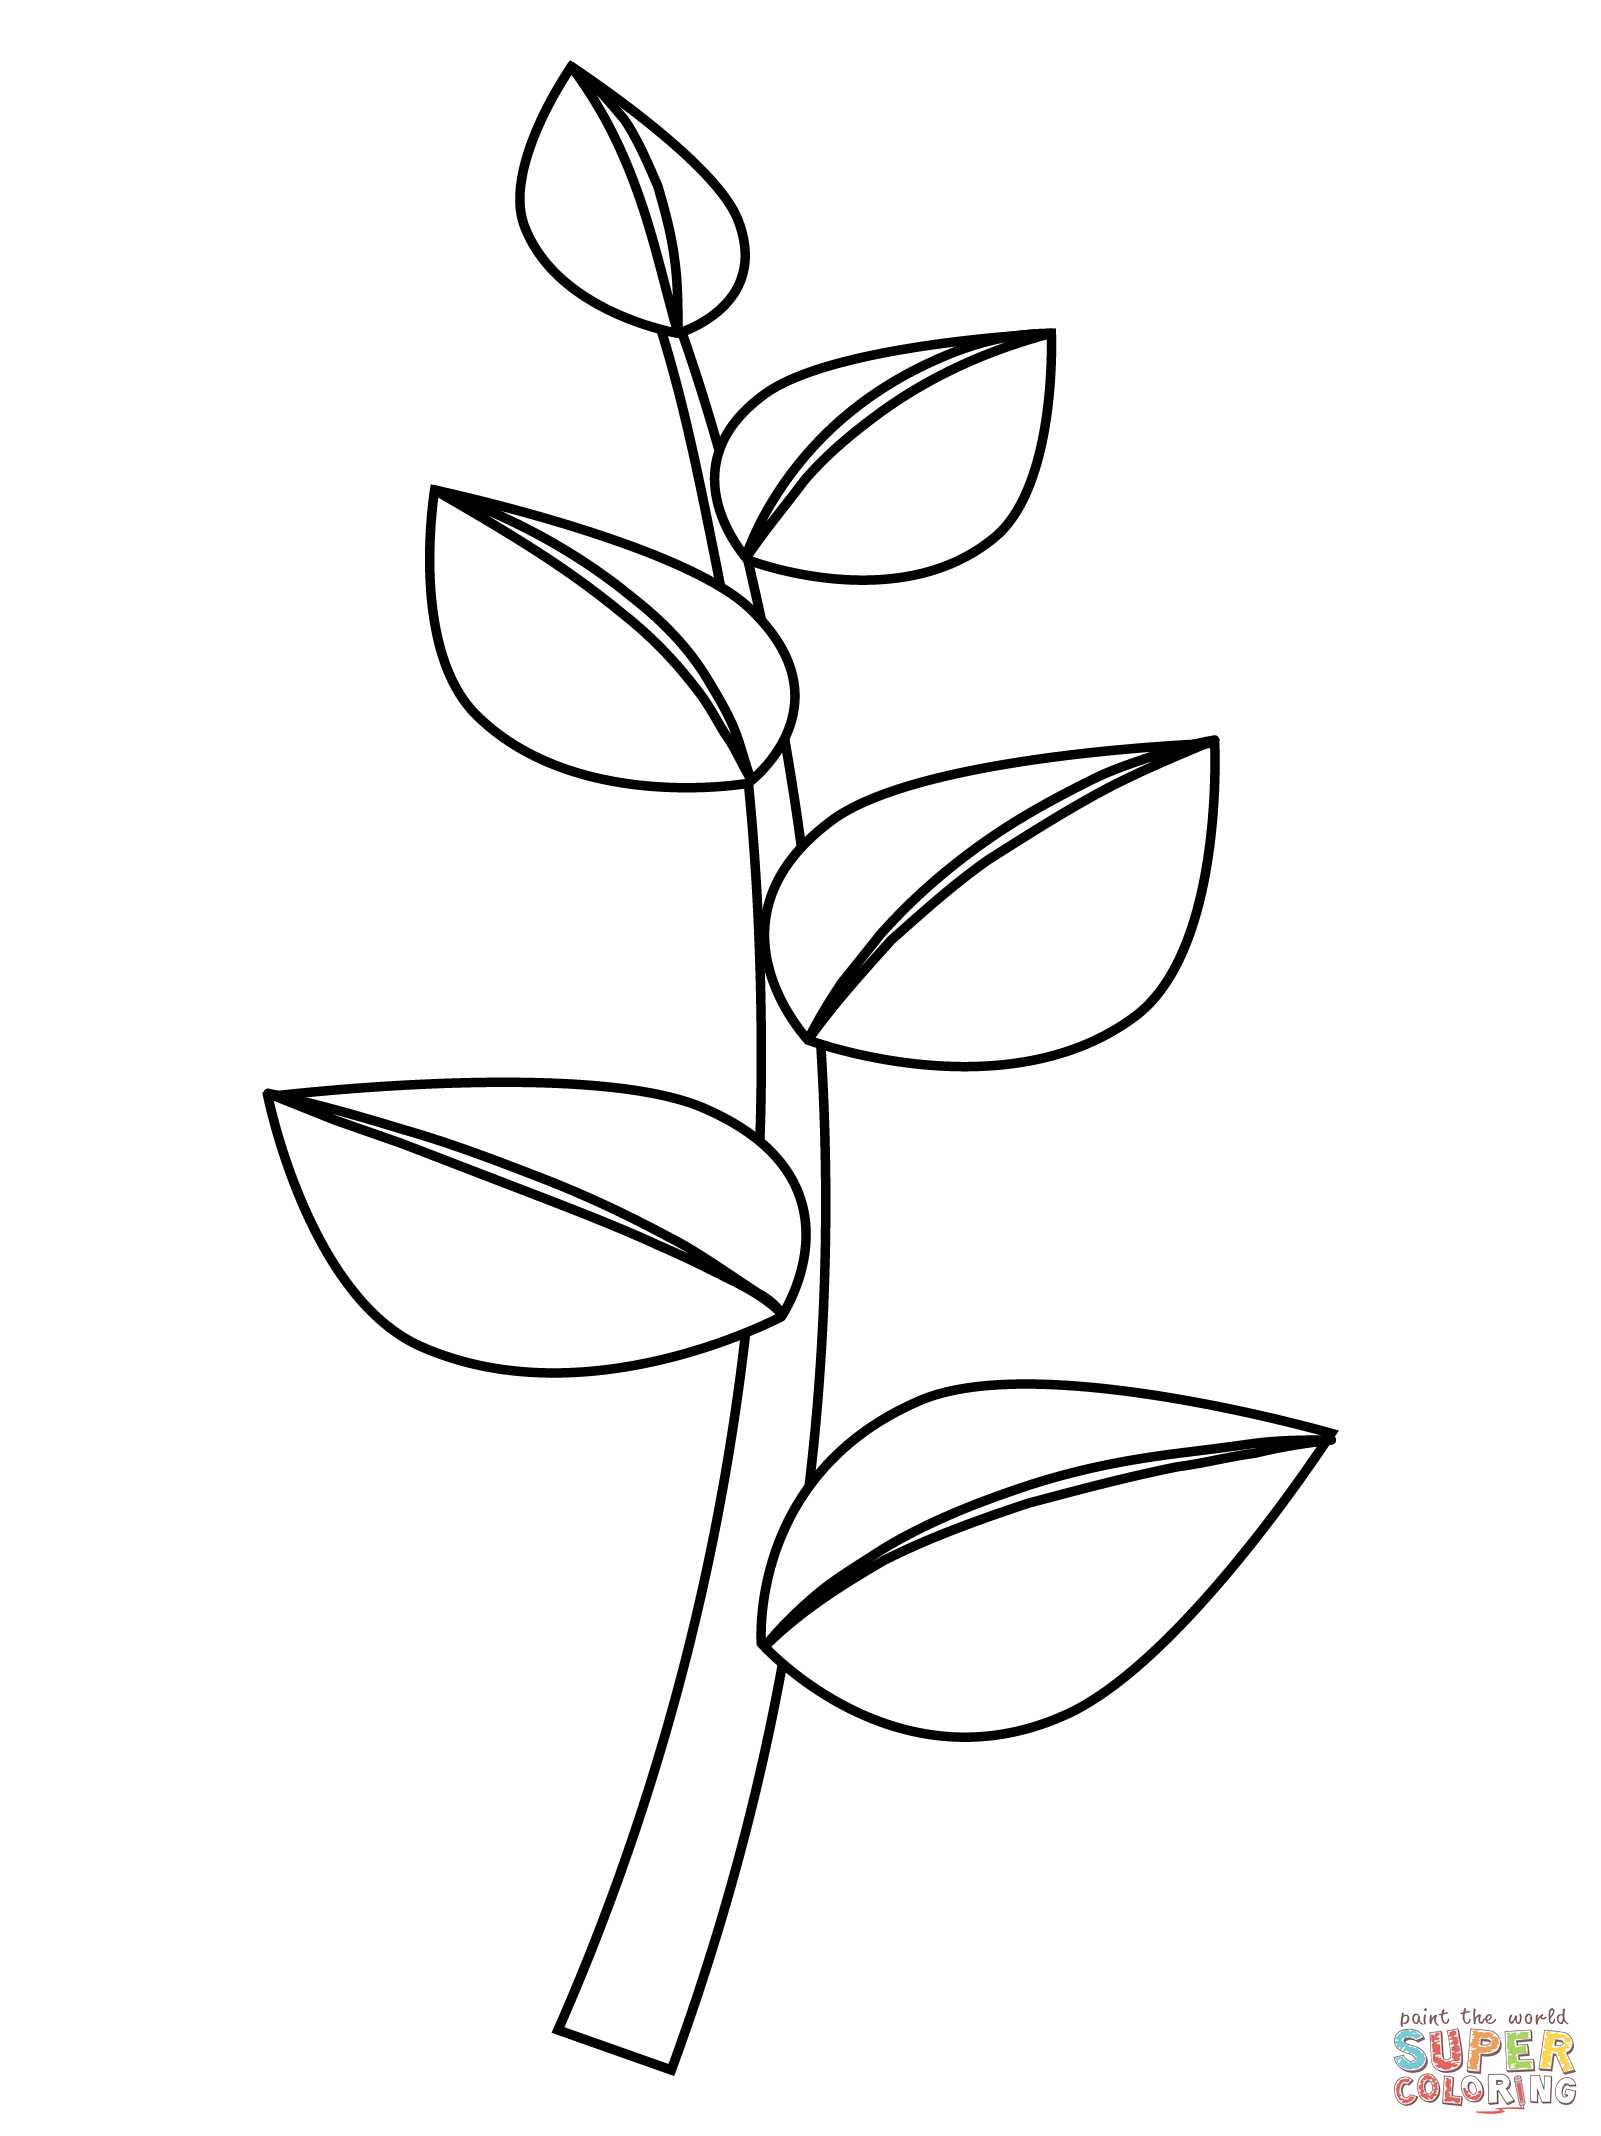 Herb coloring page | Free Printable Coloring Pages